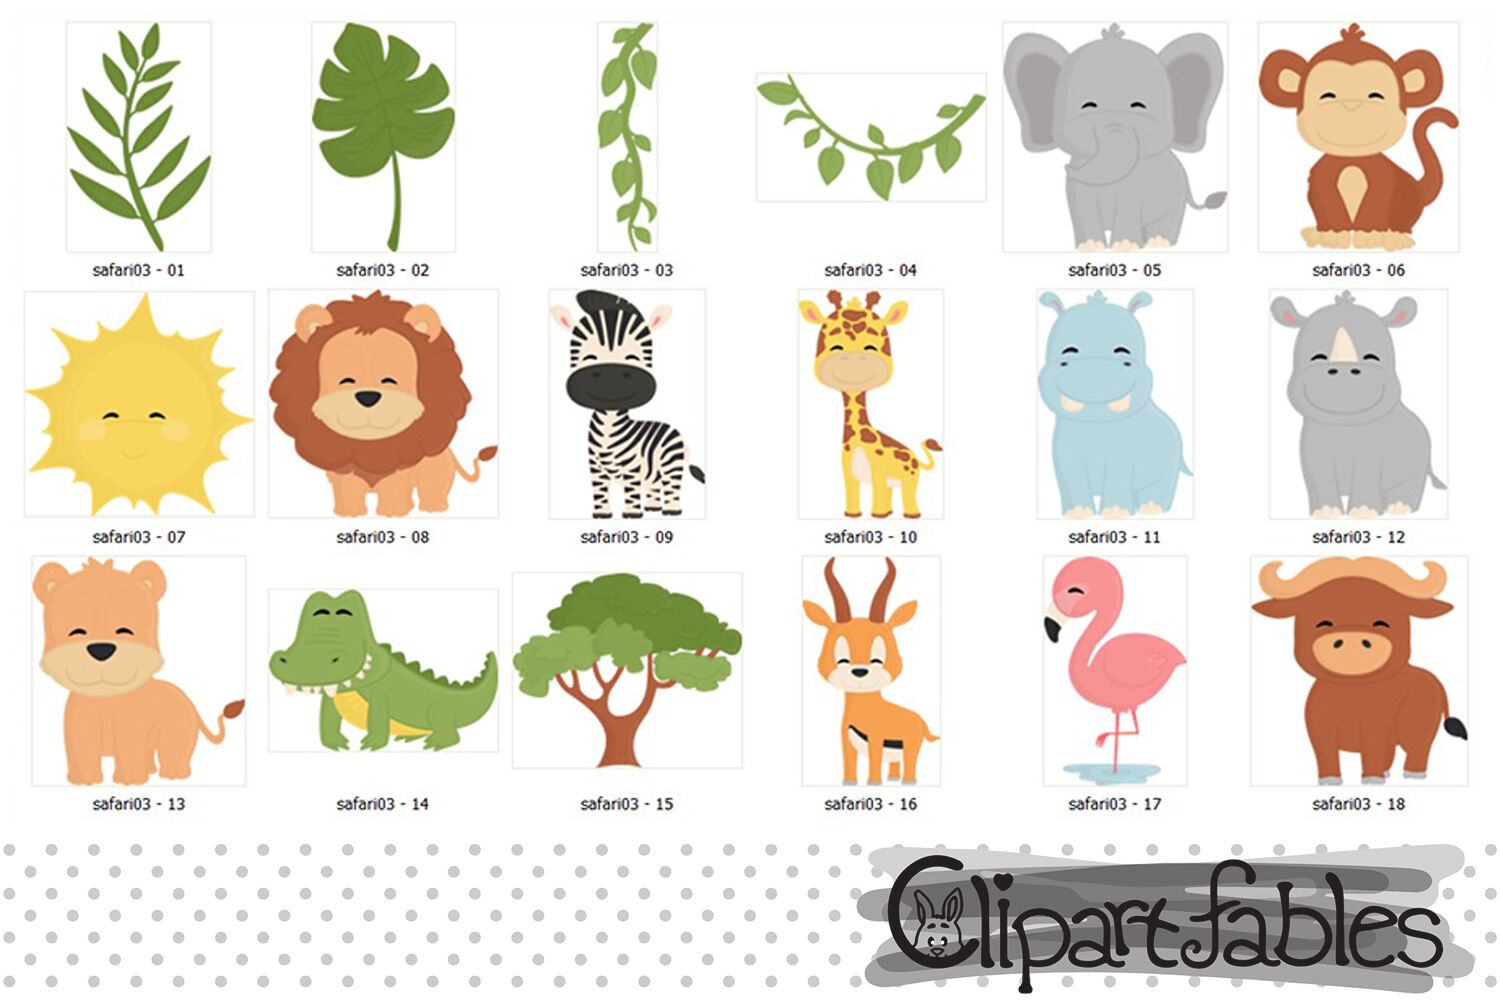 Cute SAFARI FRIENDS clipart, Baby animals, Jungle clipart By clipartfables  | TheHungryJPEG